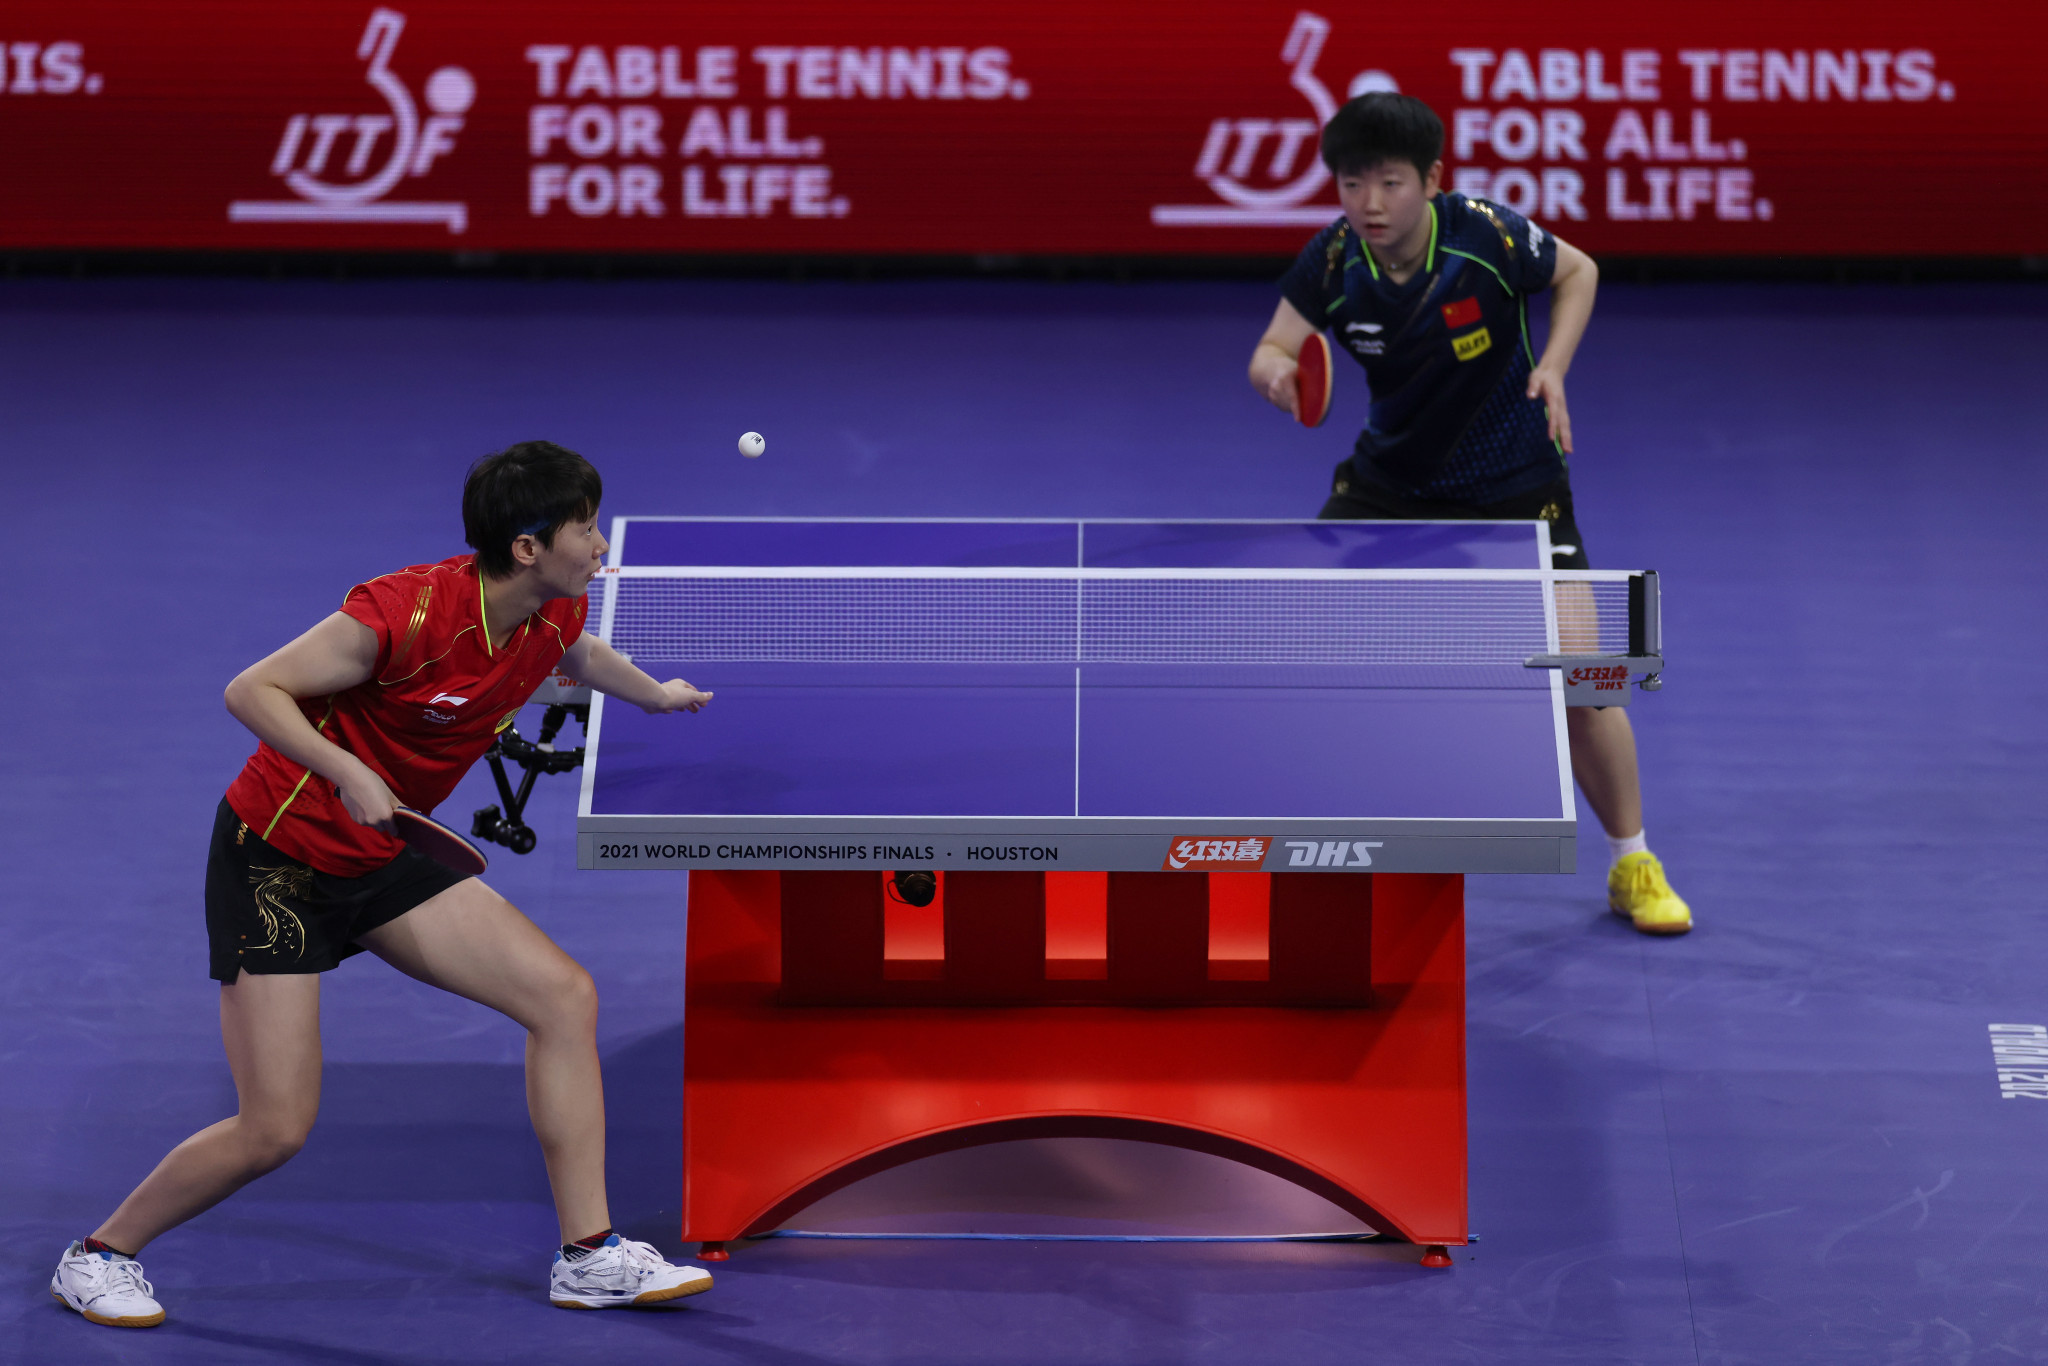 China's Wang Manyu, left, and Sun Yingsha, right, are seeking a third consecutive women's doubles world title, and both likely contenders for the singles gold ©Getty Images